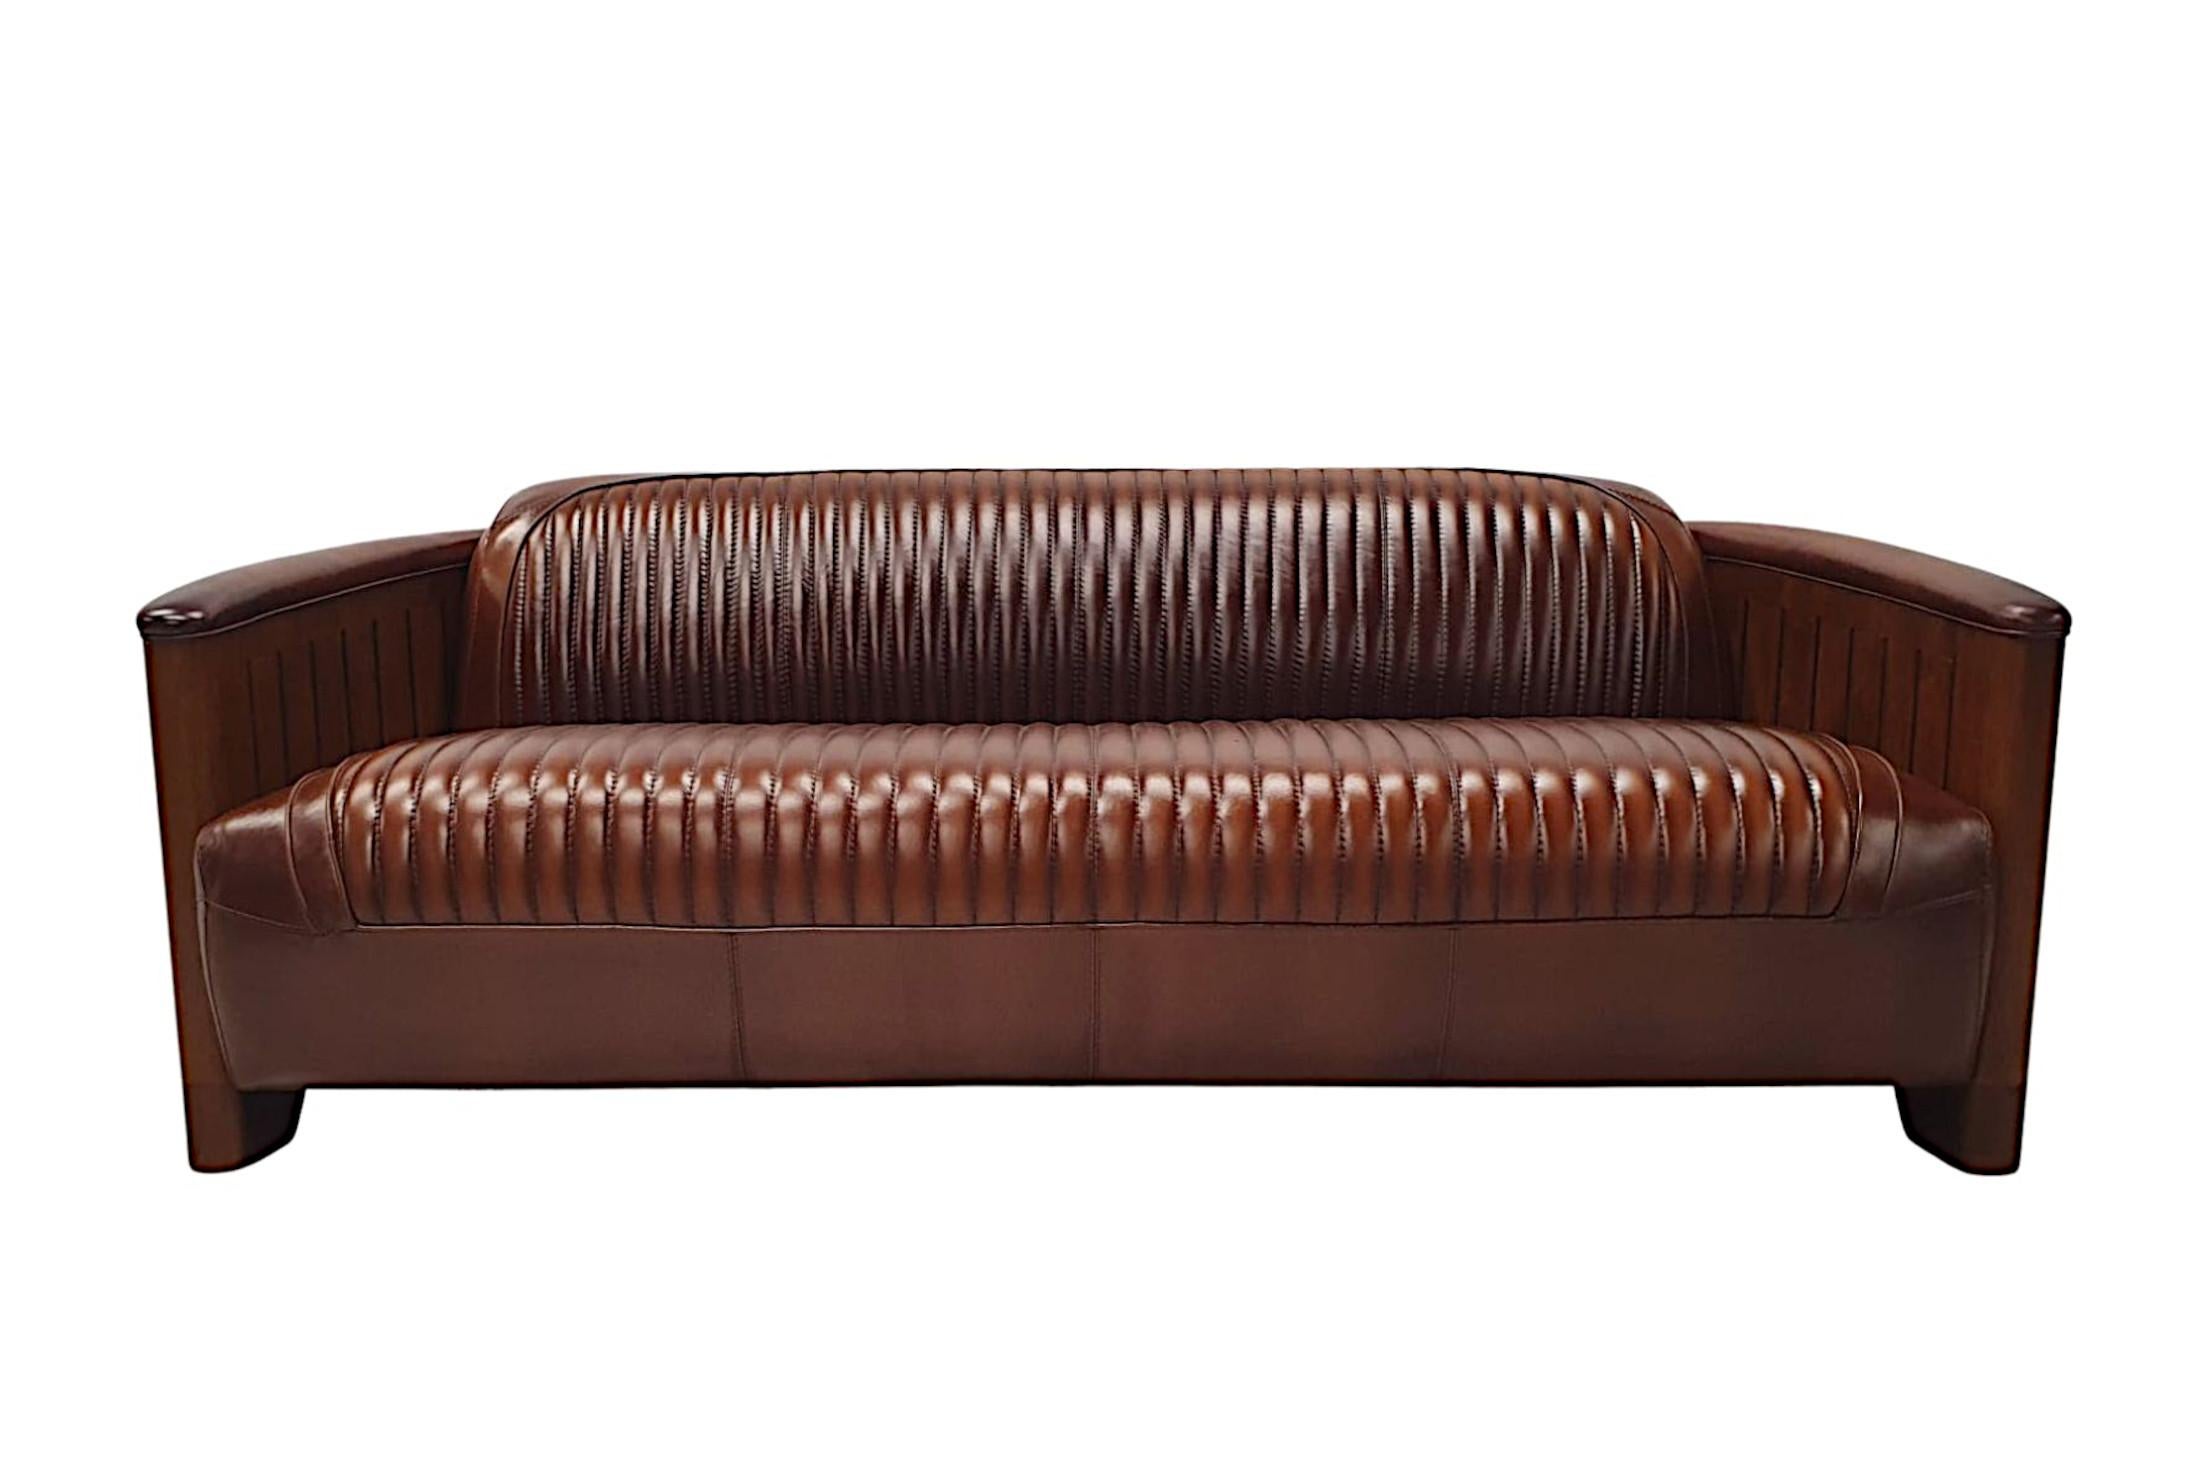 A stunning three seater leather and cherry wood framed contemporary sofa in the aviator style, of fabulous quality and with gorgeous patination and grain. Beautifully upholstered in elegant brown leather with innovative horizontal pipe stitch detail